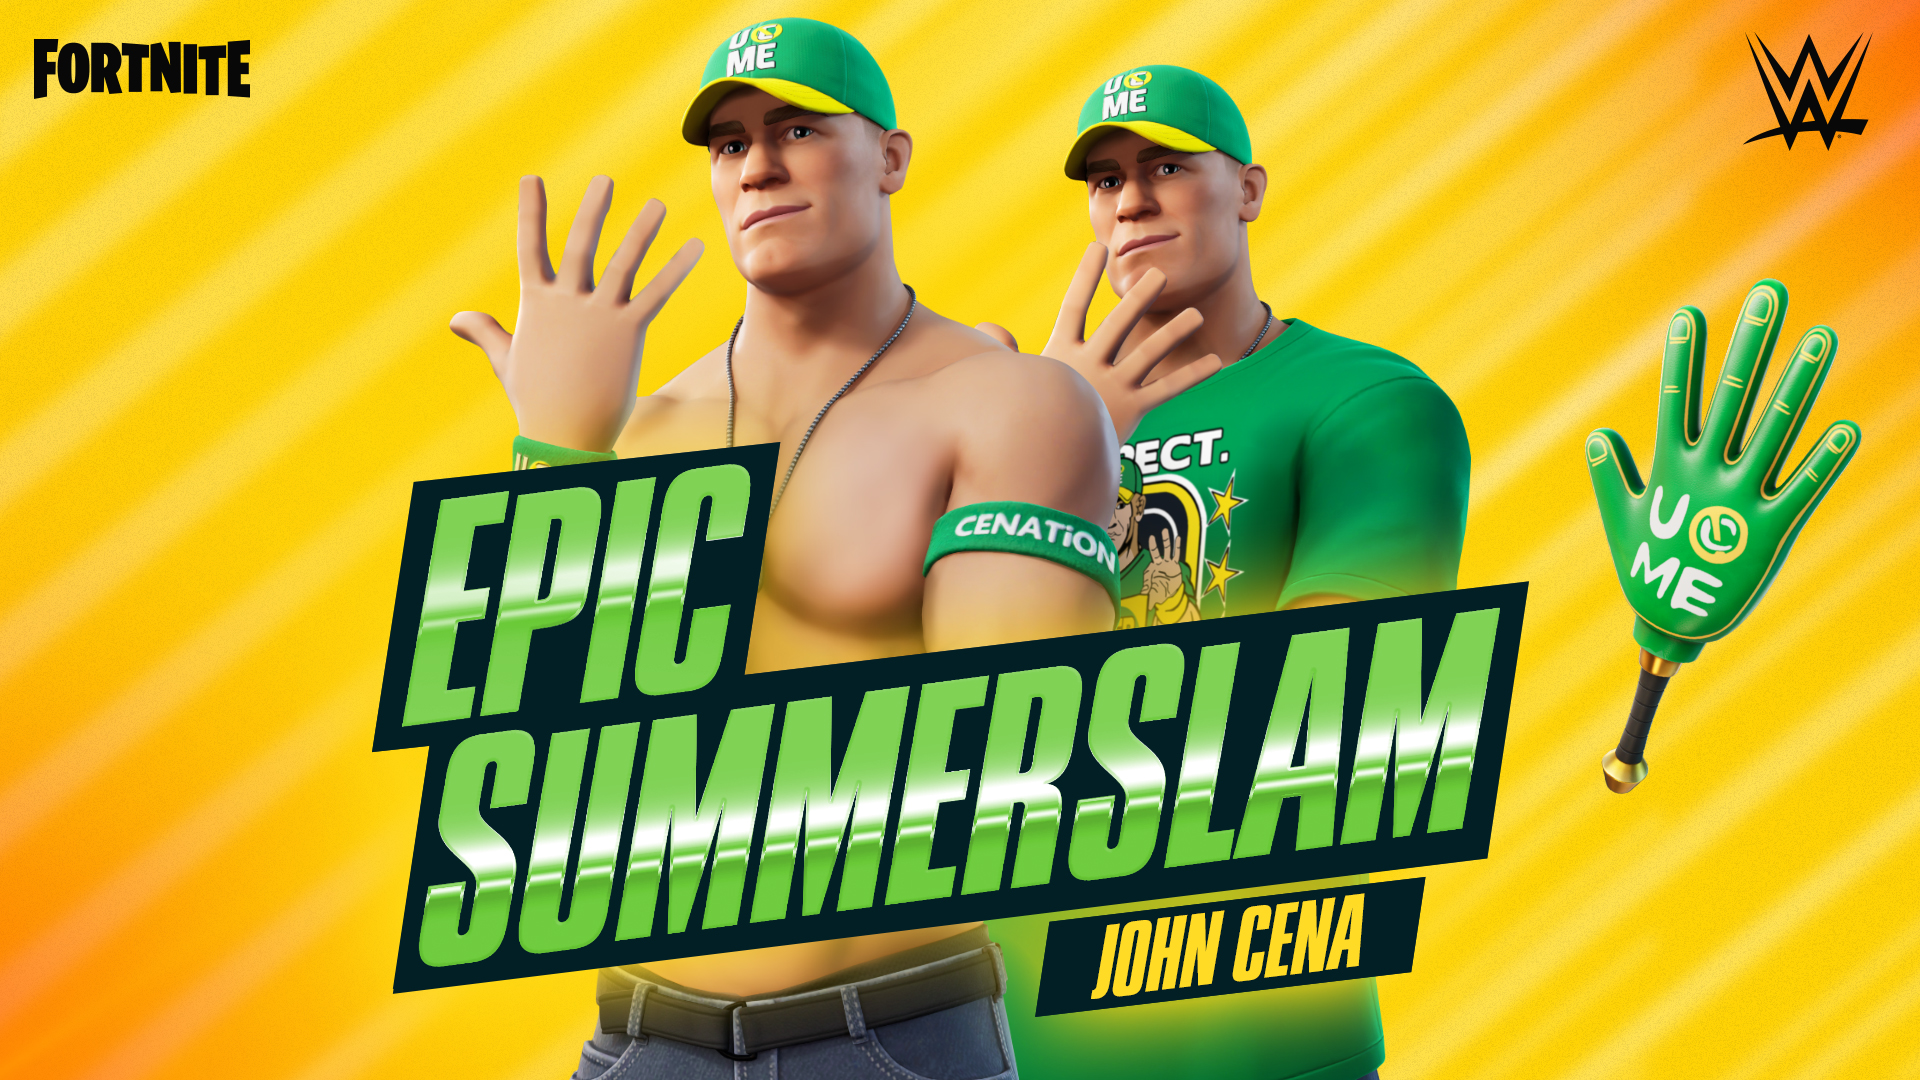 Fortnite The Champ Is Here Grab The New John Cena Set Available Now In The Shop T Co 311apkdukh Twitter